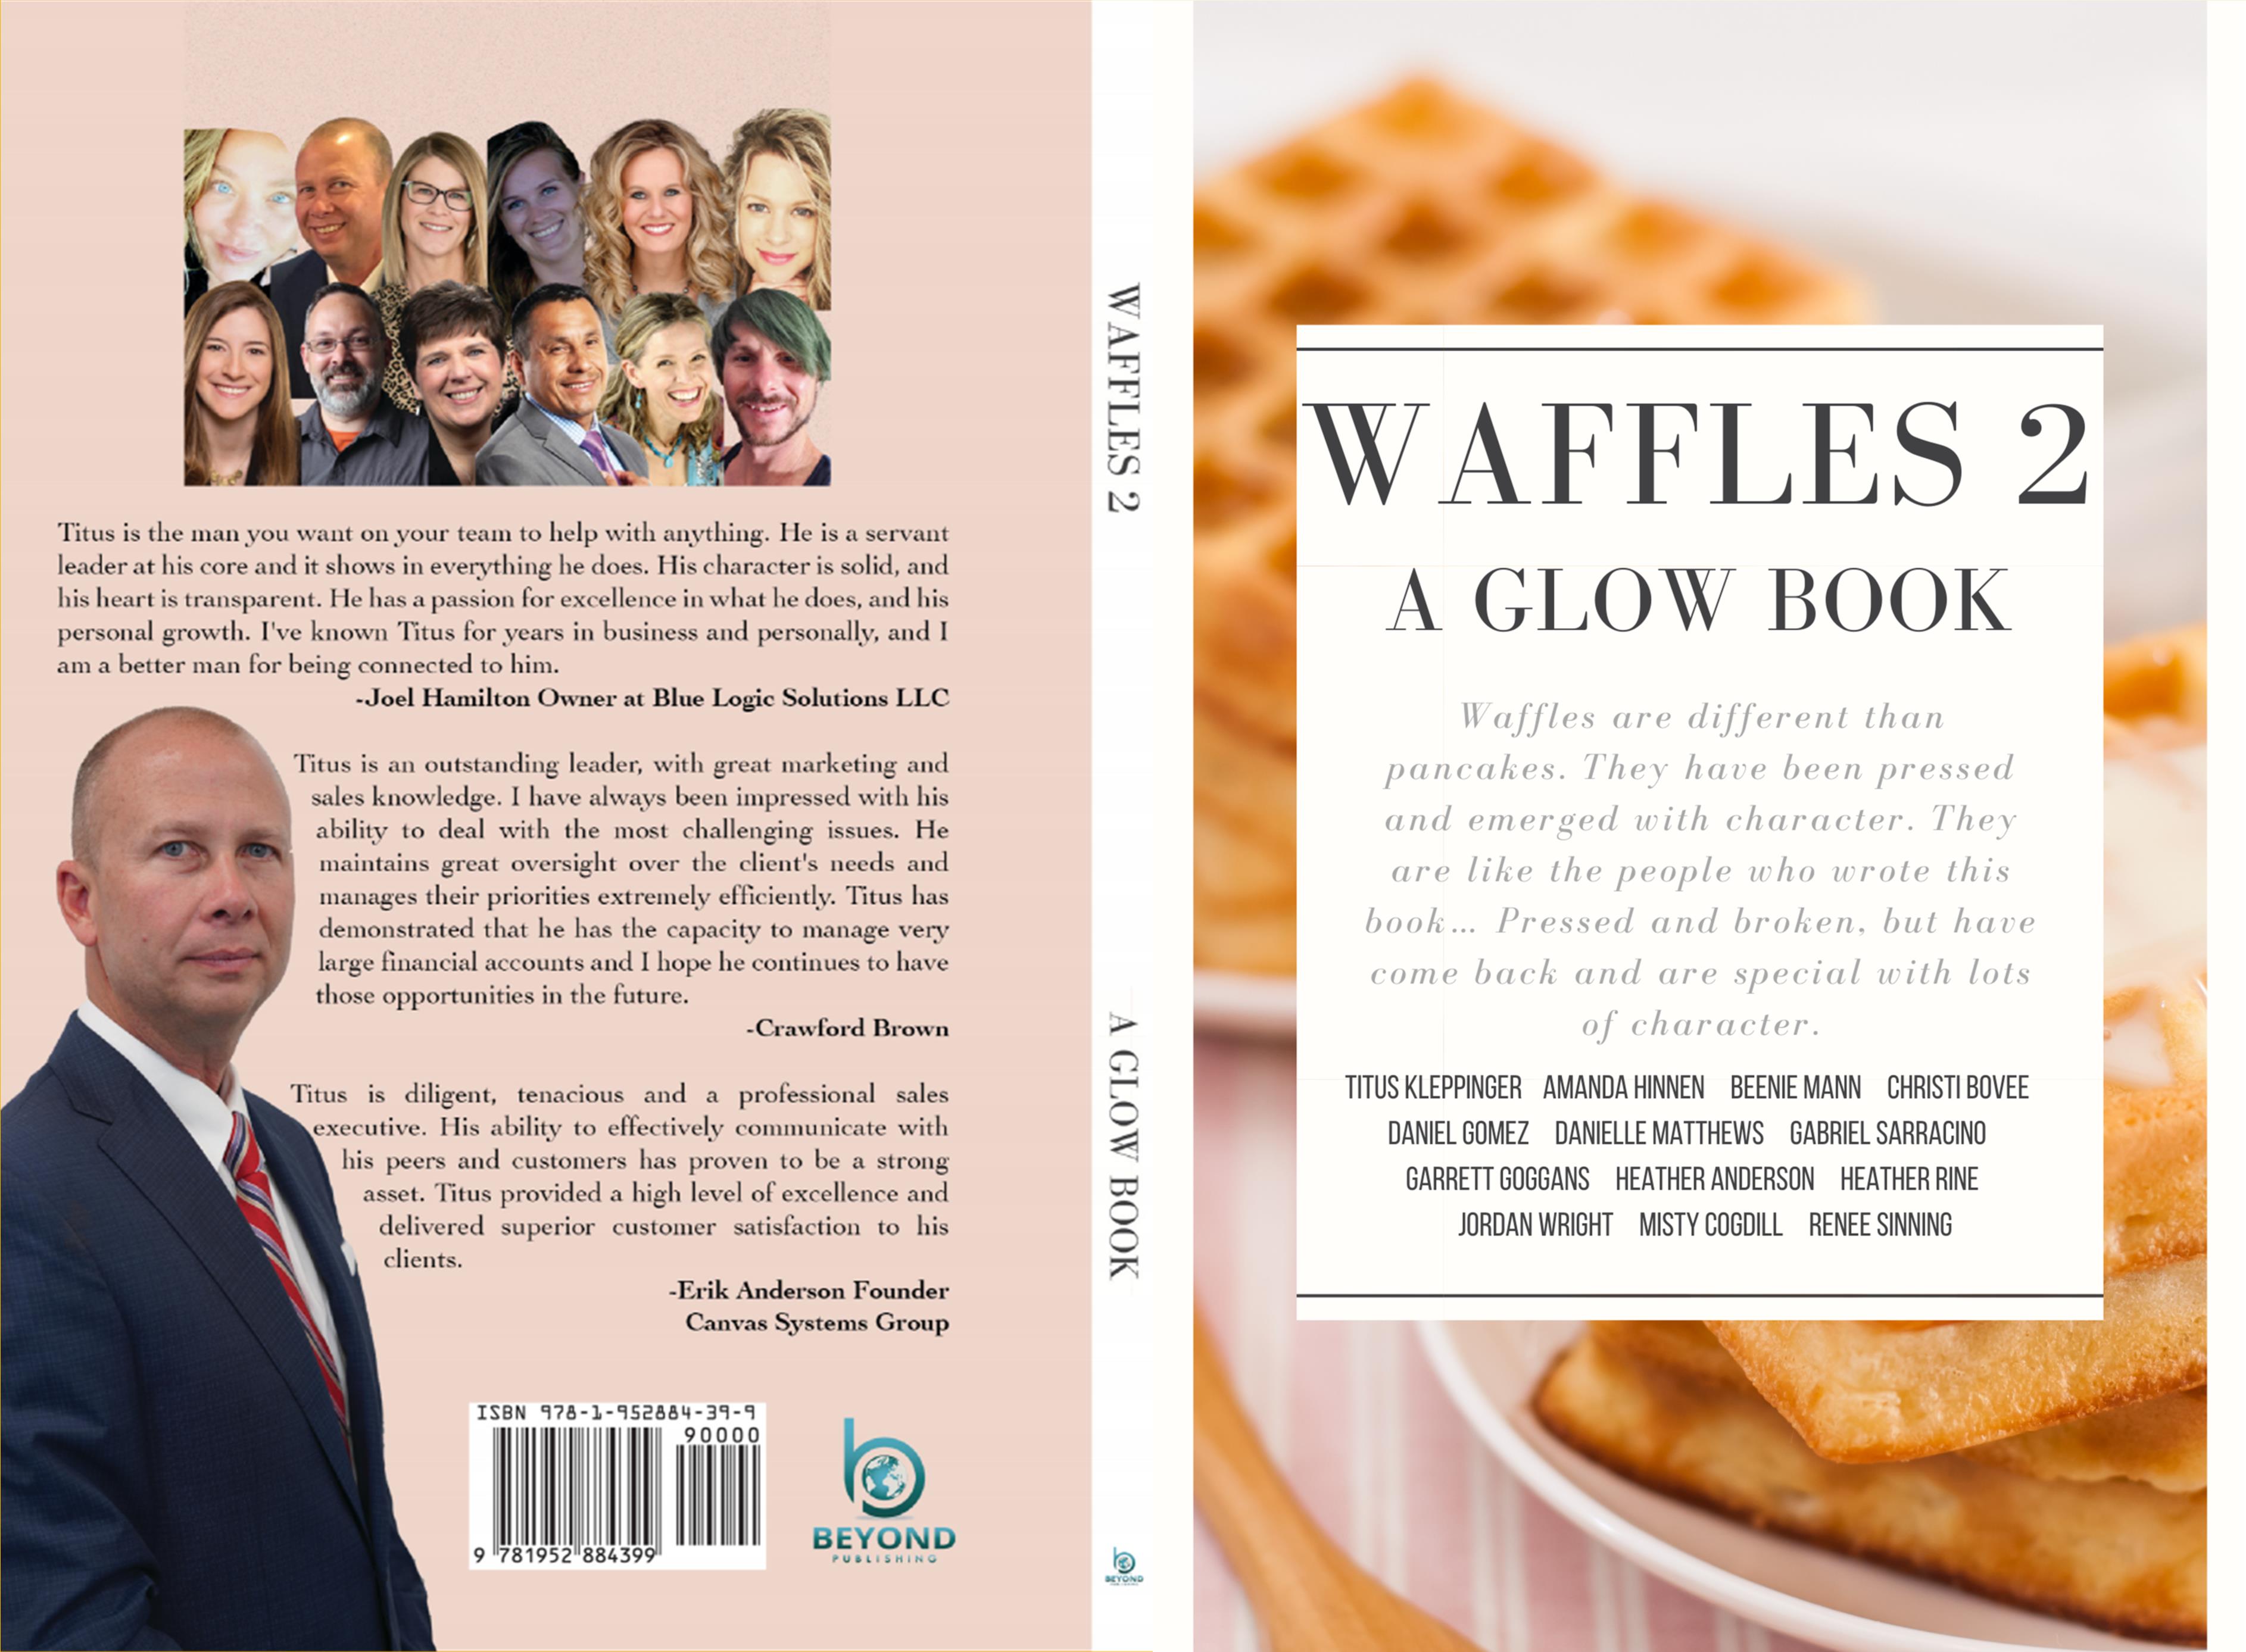 Waffles 2 - a Glow book cover image